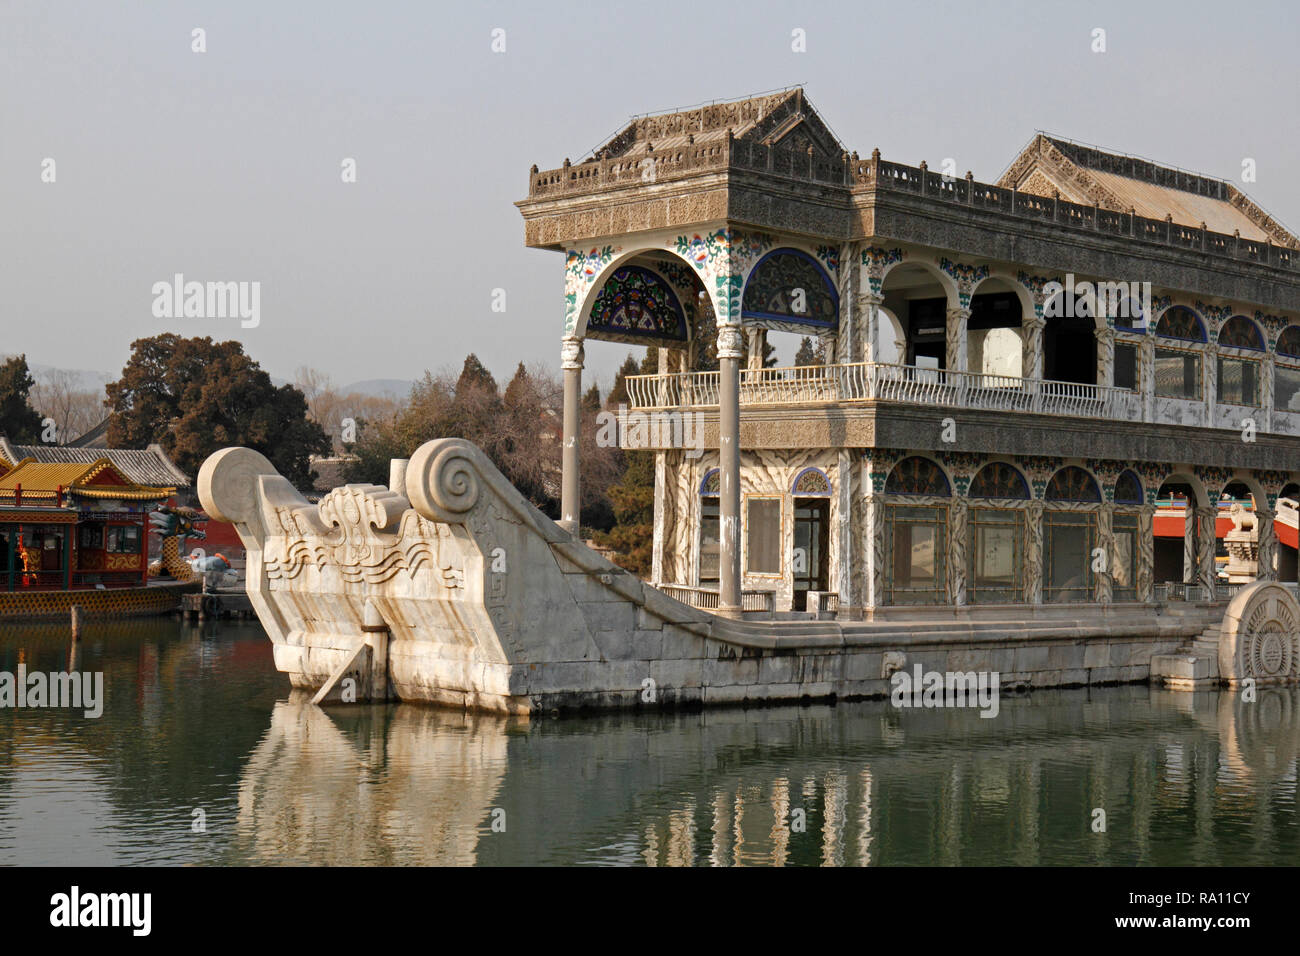 The stone or marble boat, made in 1755, Qing dynasty. Repaired  1893, Summer Palace, Beijing. China. Boat of Purity and Ease Clear and Peaceful Boat. Stock Photo